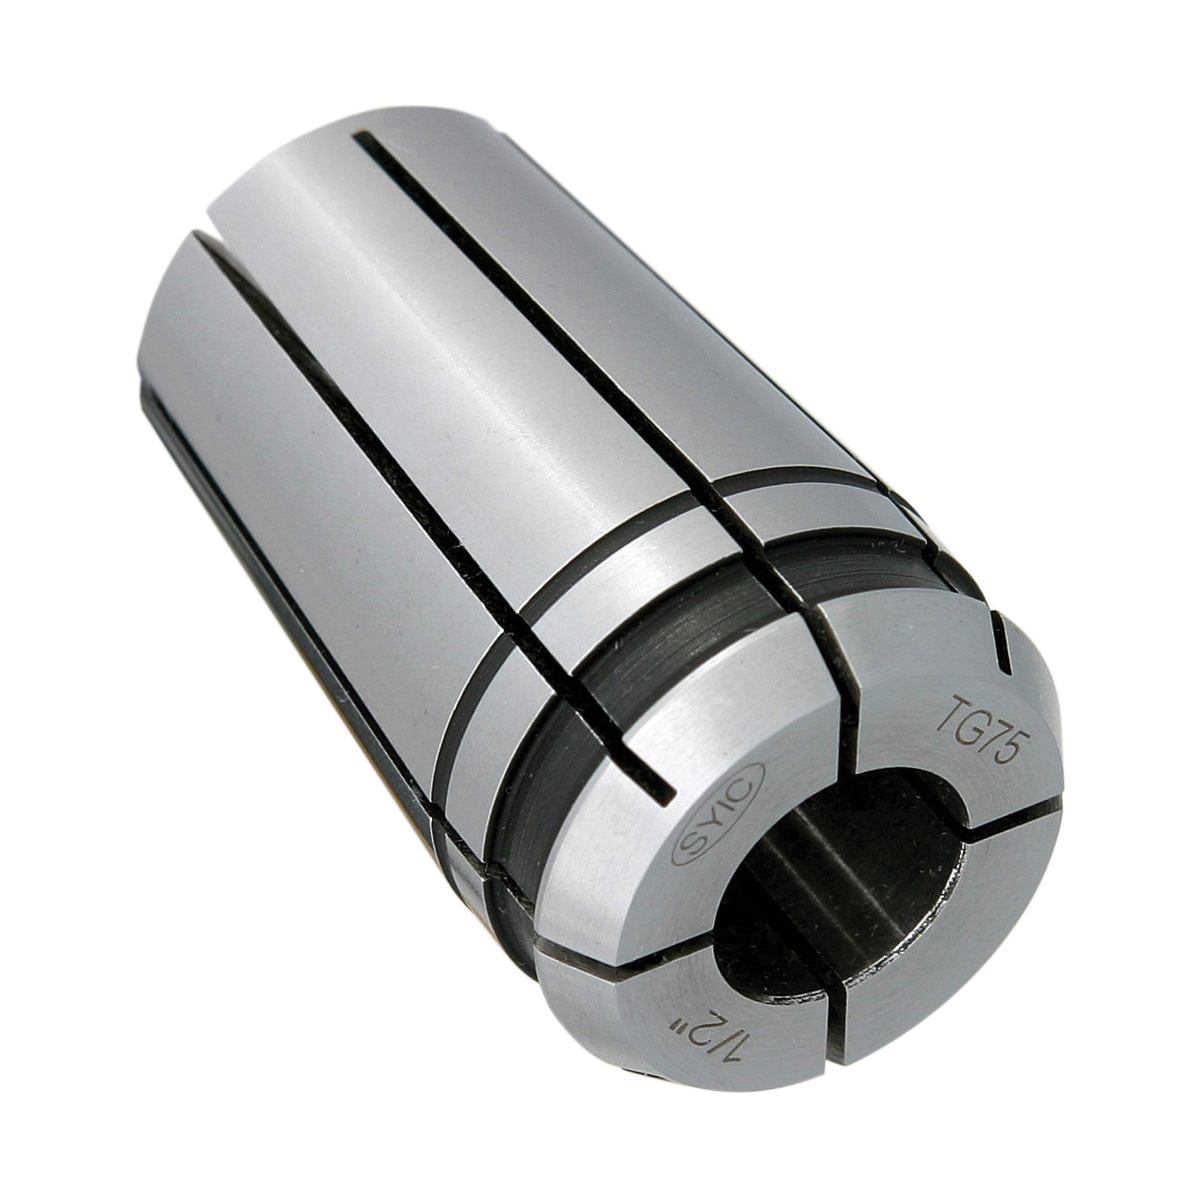 TG75 15/32" COLLET